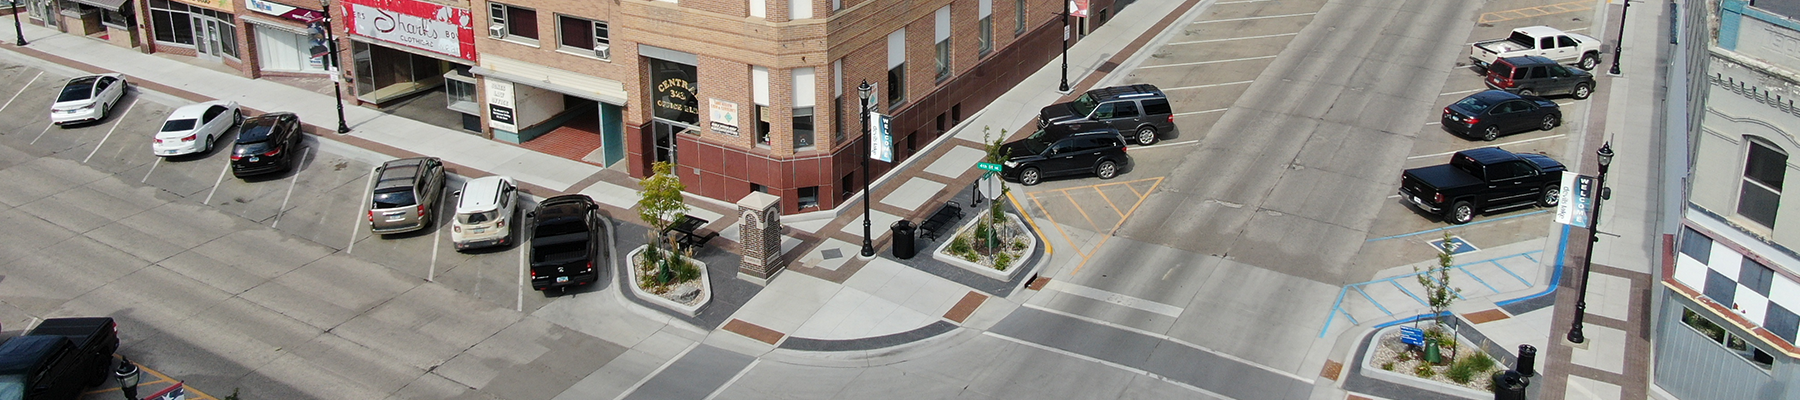 Completed urban revitalization project in downtown Devils Lake North Dakota.